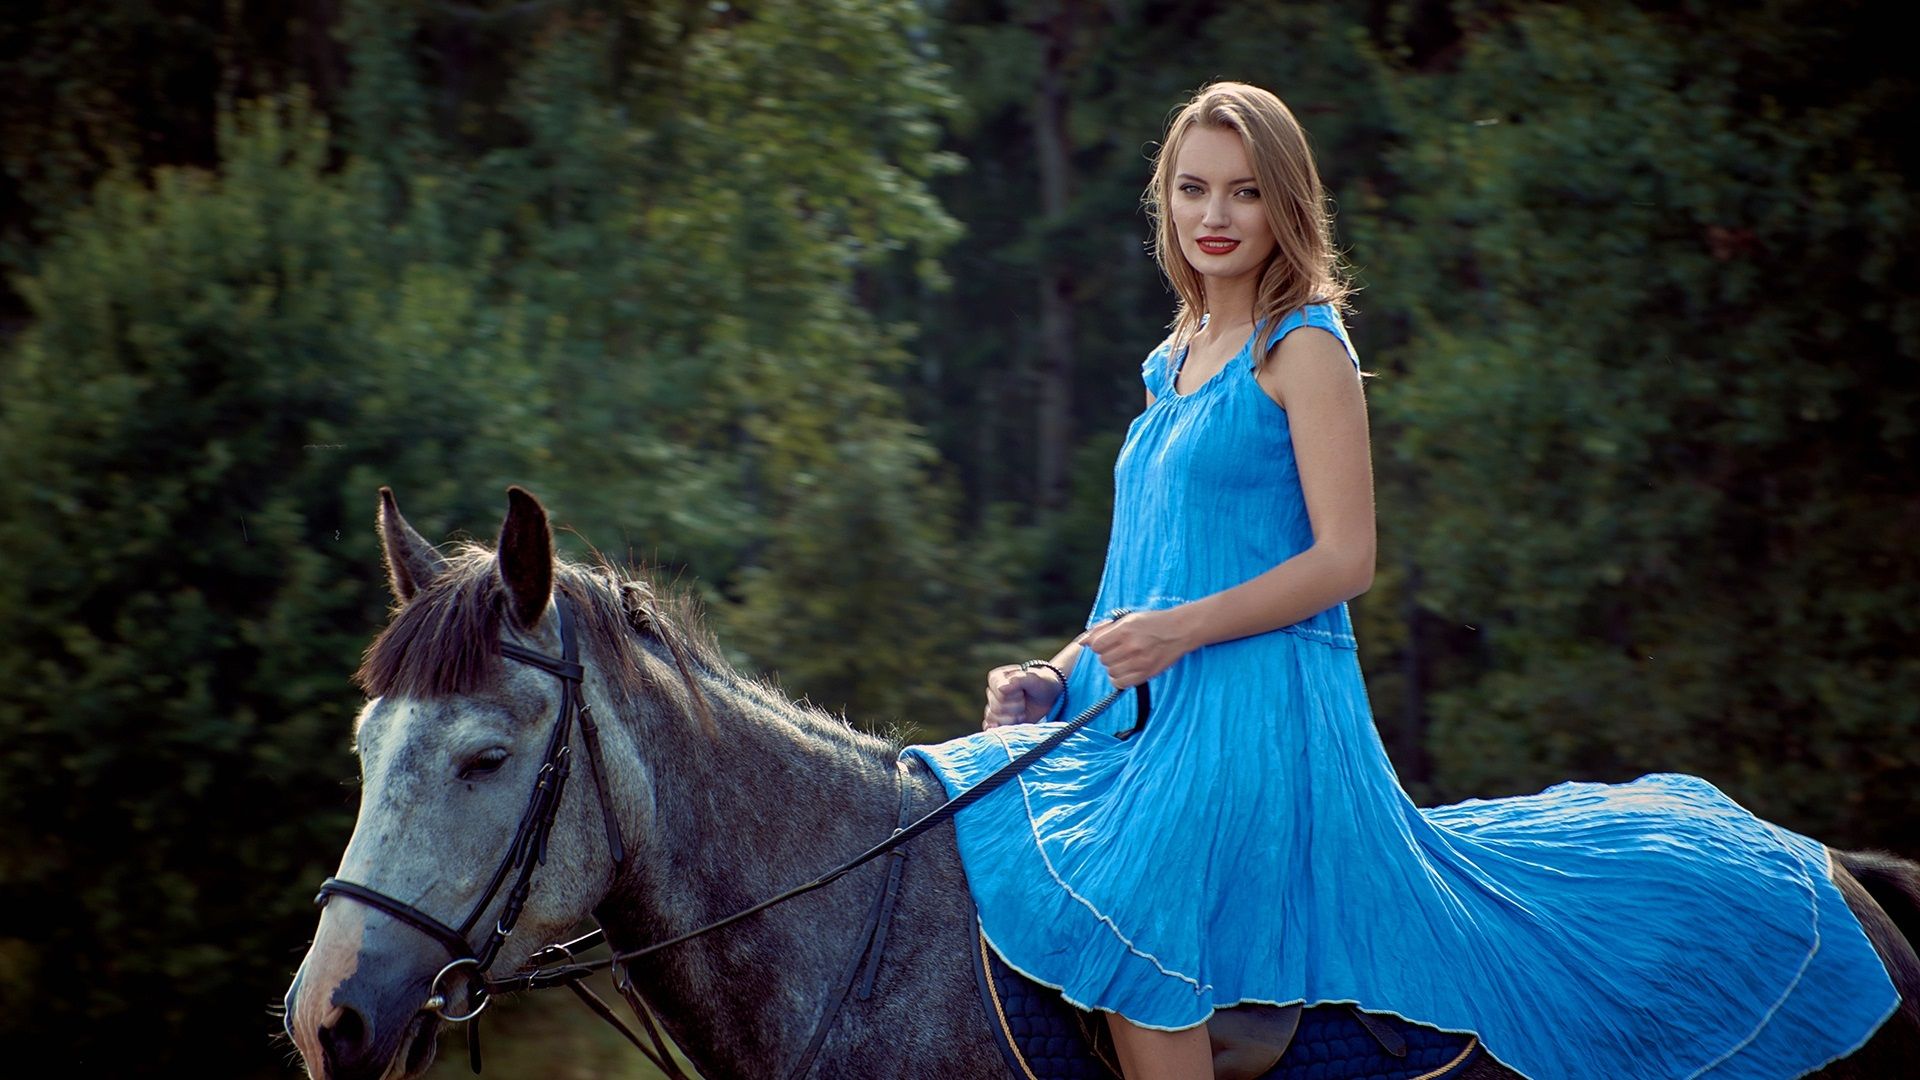 Wallpaper Blue skirt girl riding horse 1920x1200 HD Picture, Image